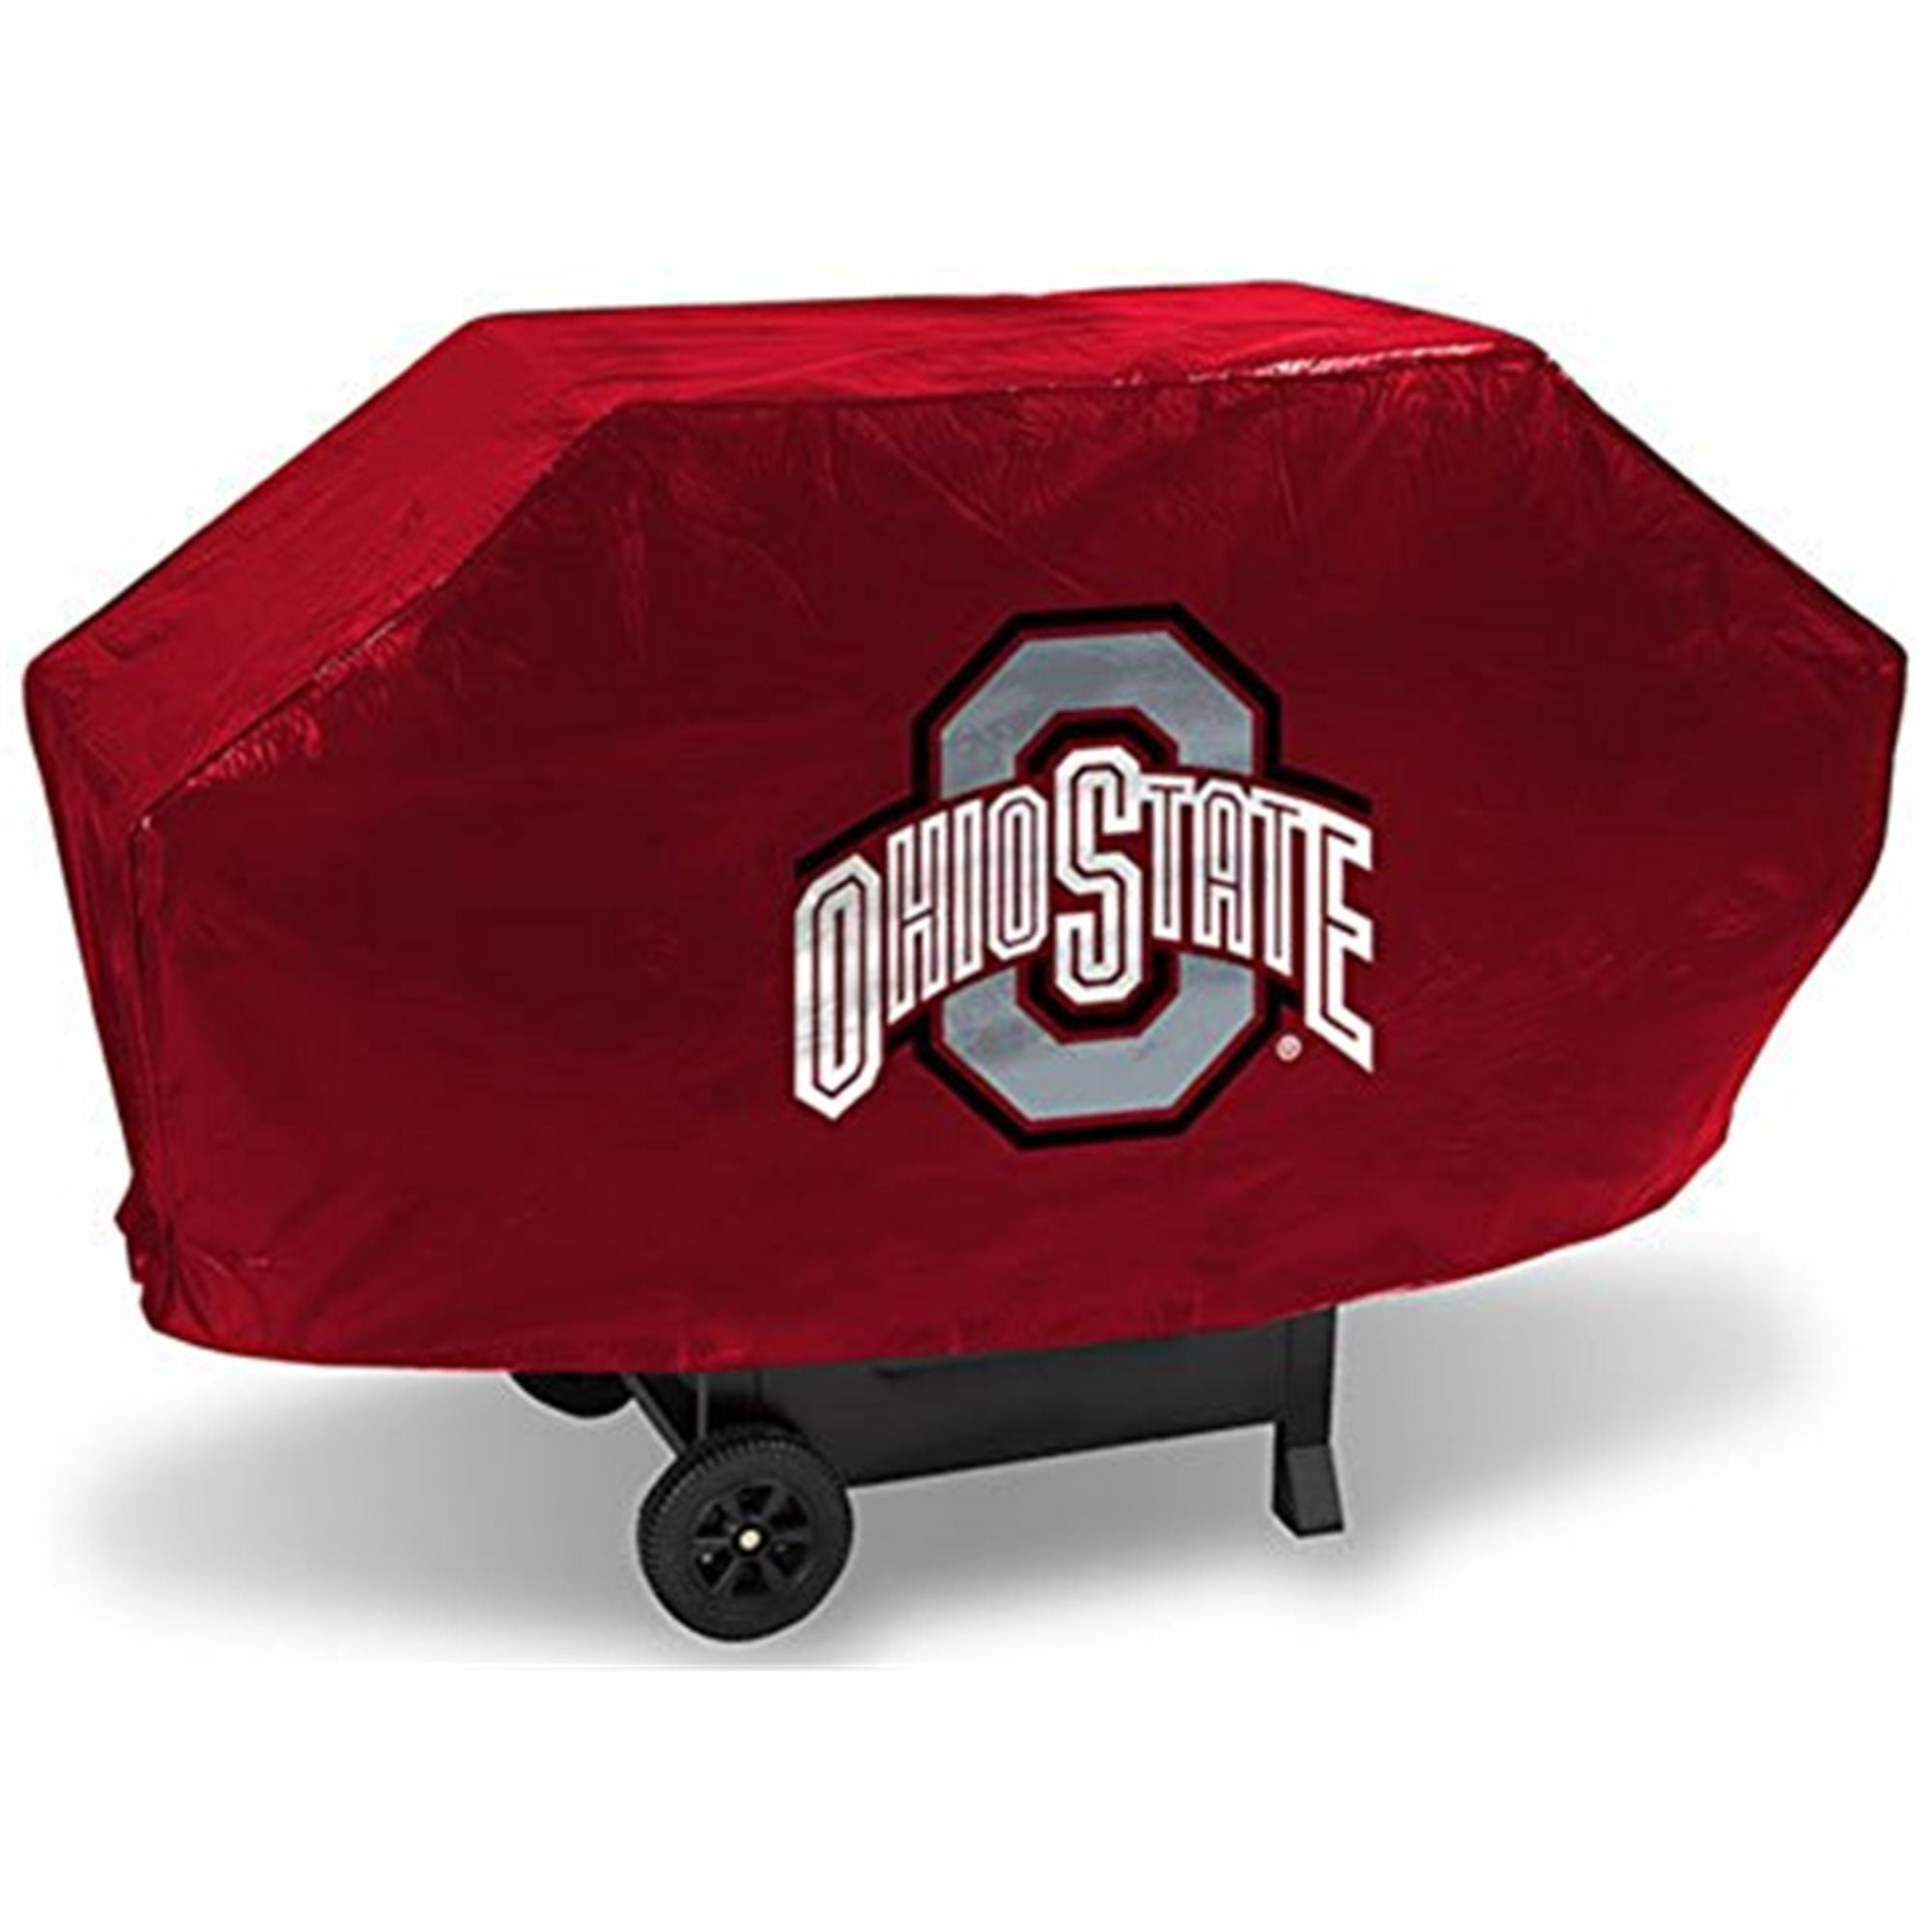 Rico Industries NCAA Deluxe Grill Cover